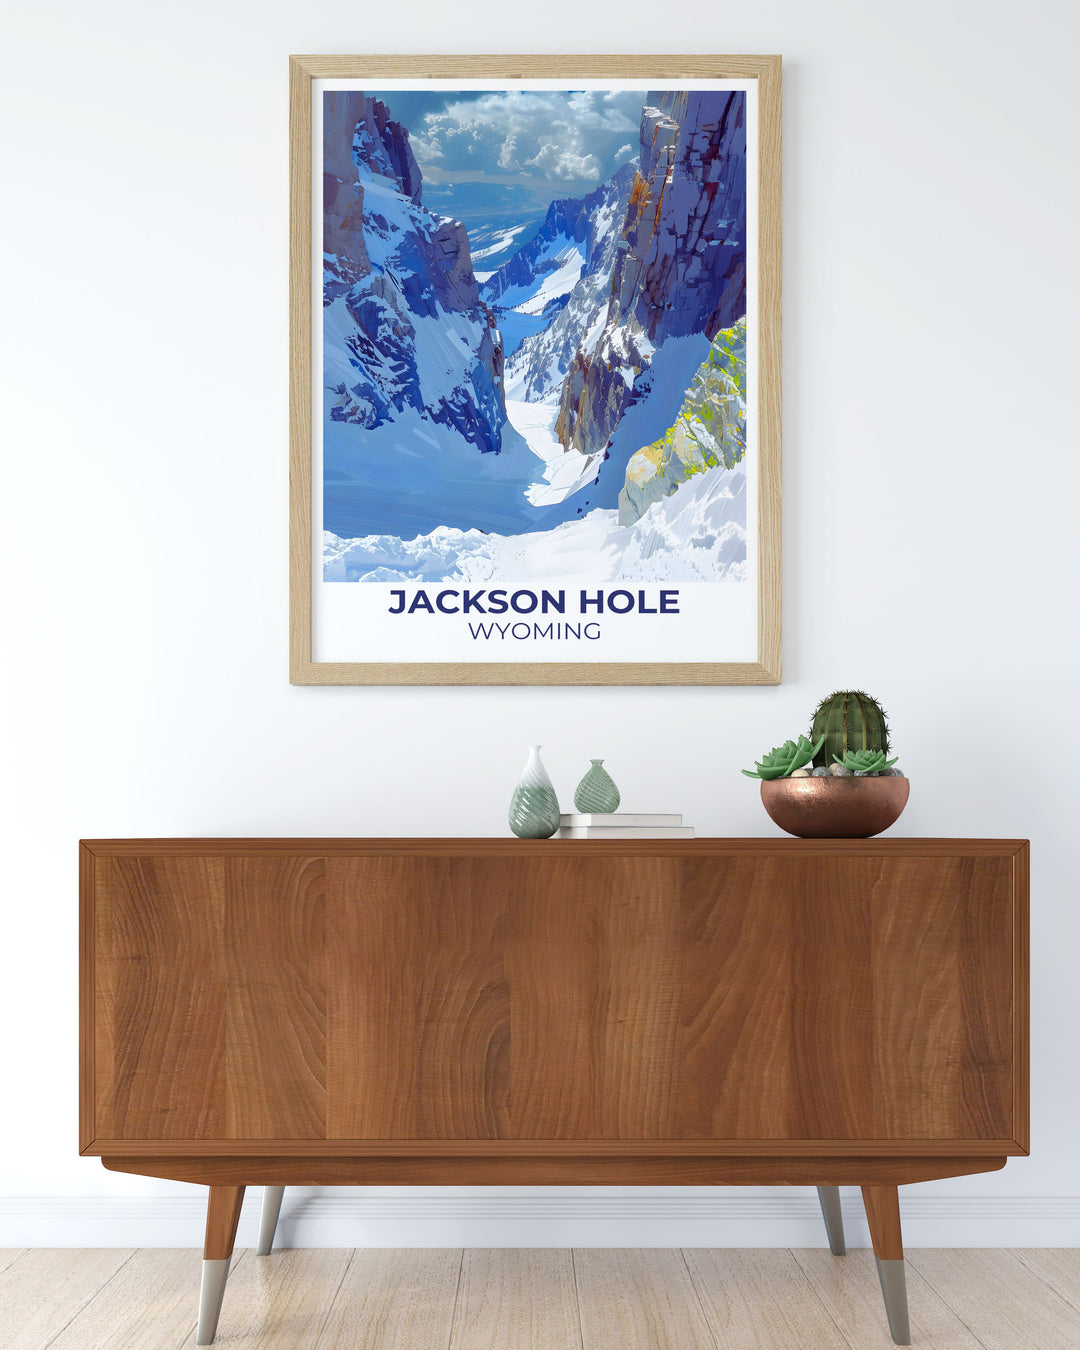 Custom print of Corbets Couloir showing skiers tackling the challenging slopes, perfect for a sports-themed room